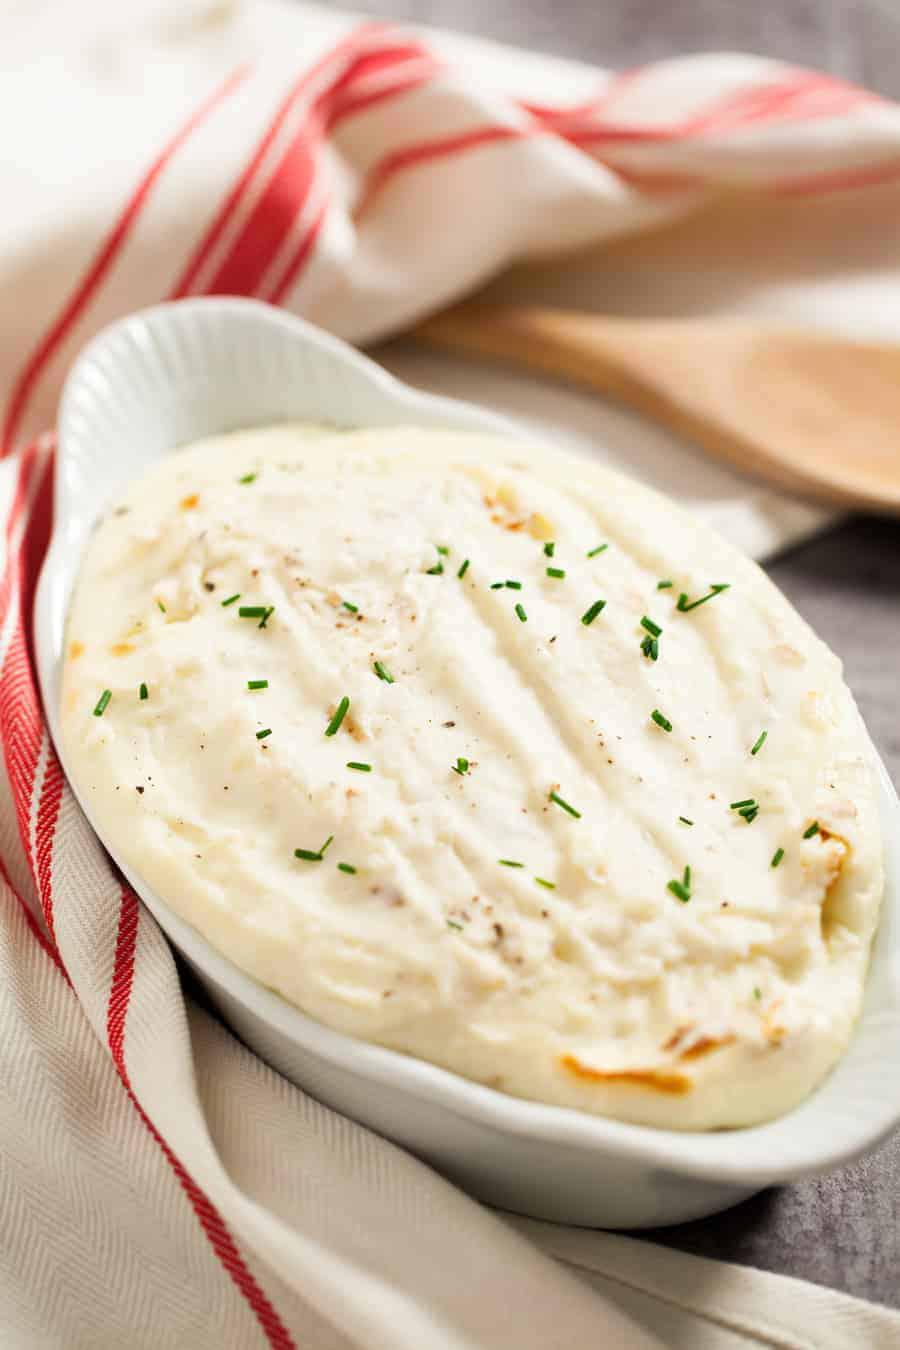 Smooth and Creamy Country Mashed Potatoes